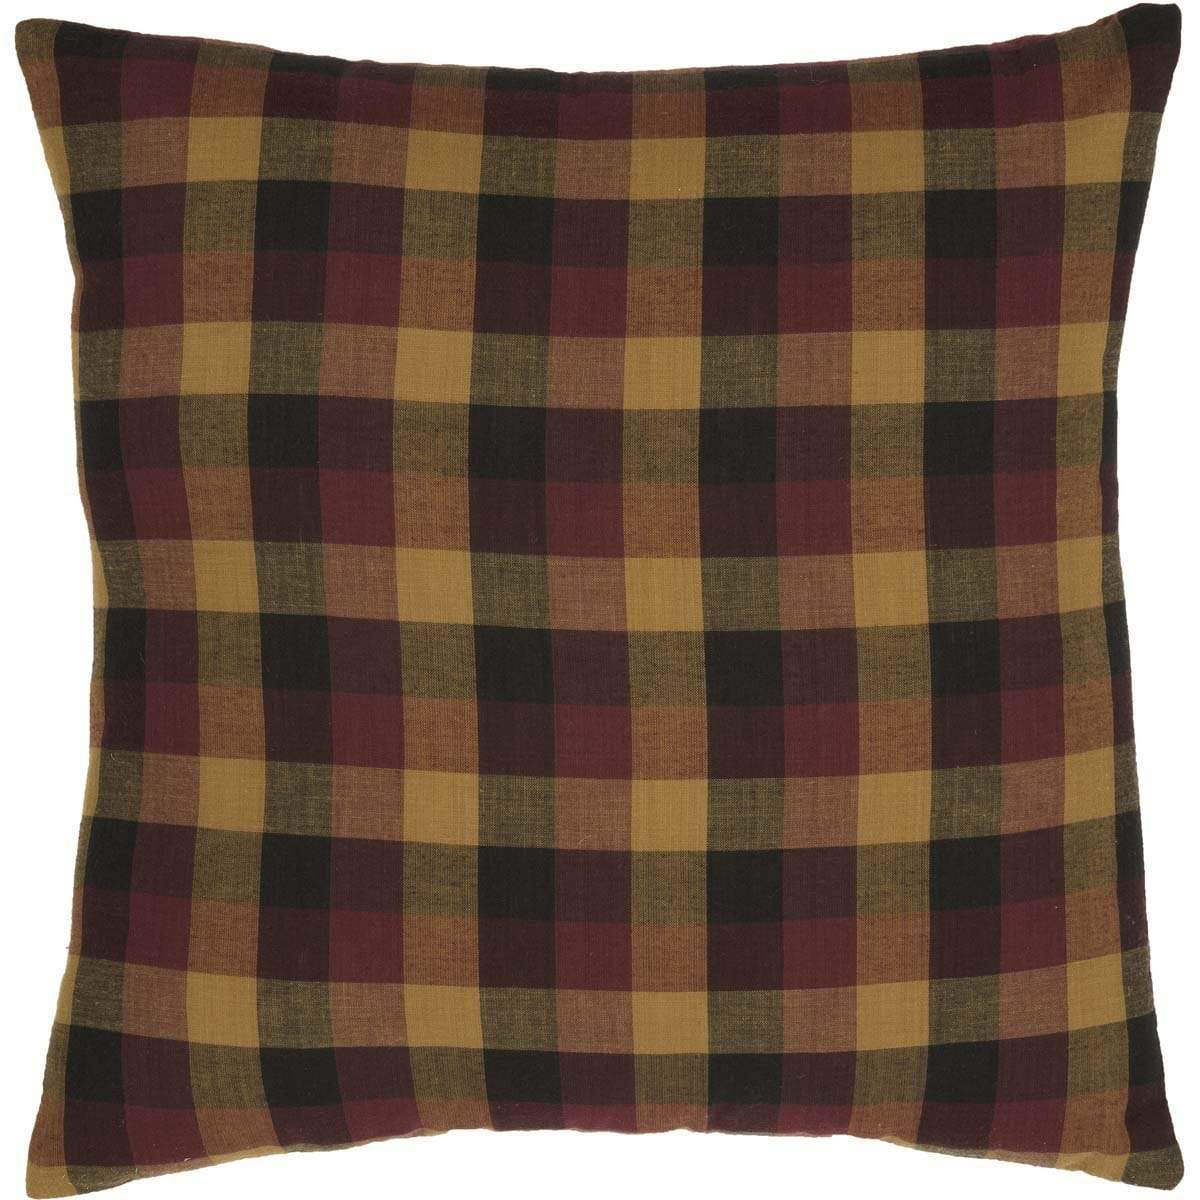 https://thevillagecountrystore.com/cdn/shop/products/mayflower-market-pillow-cover-heritage-farms-primitive-check-fabric-pillow-16x16-4213109063755.jpg?v=1571320703